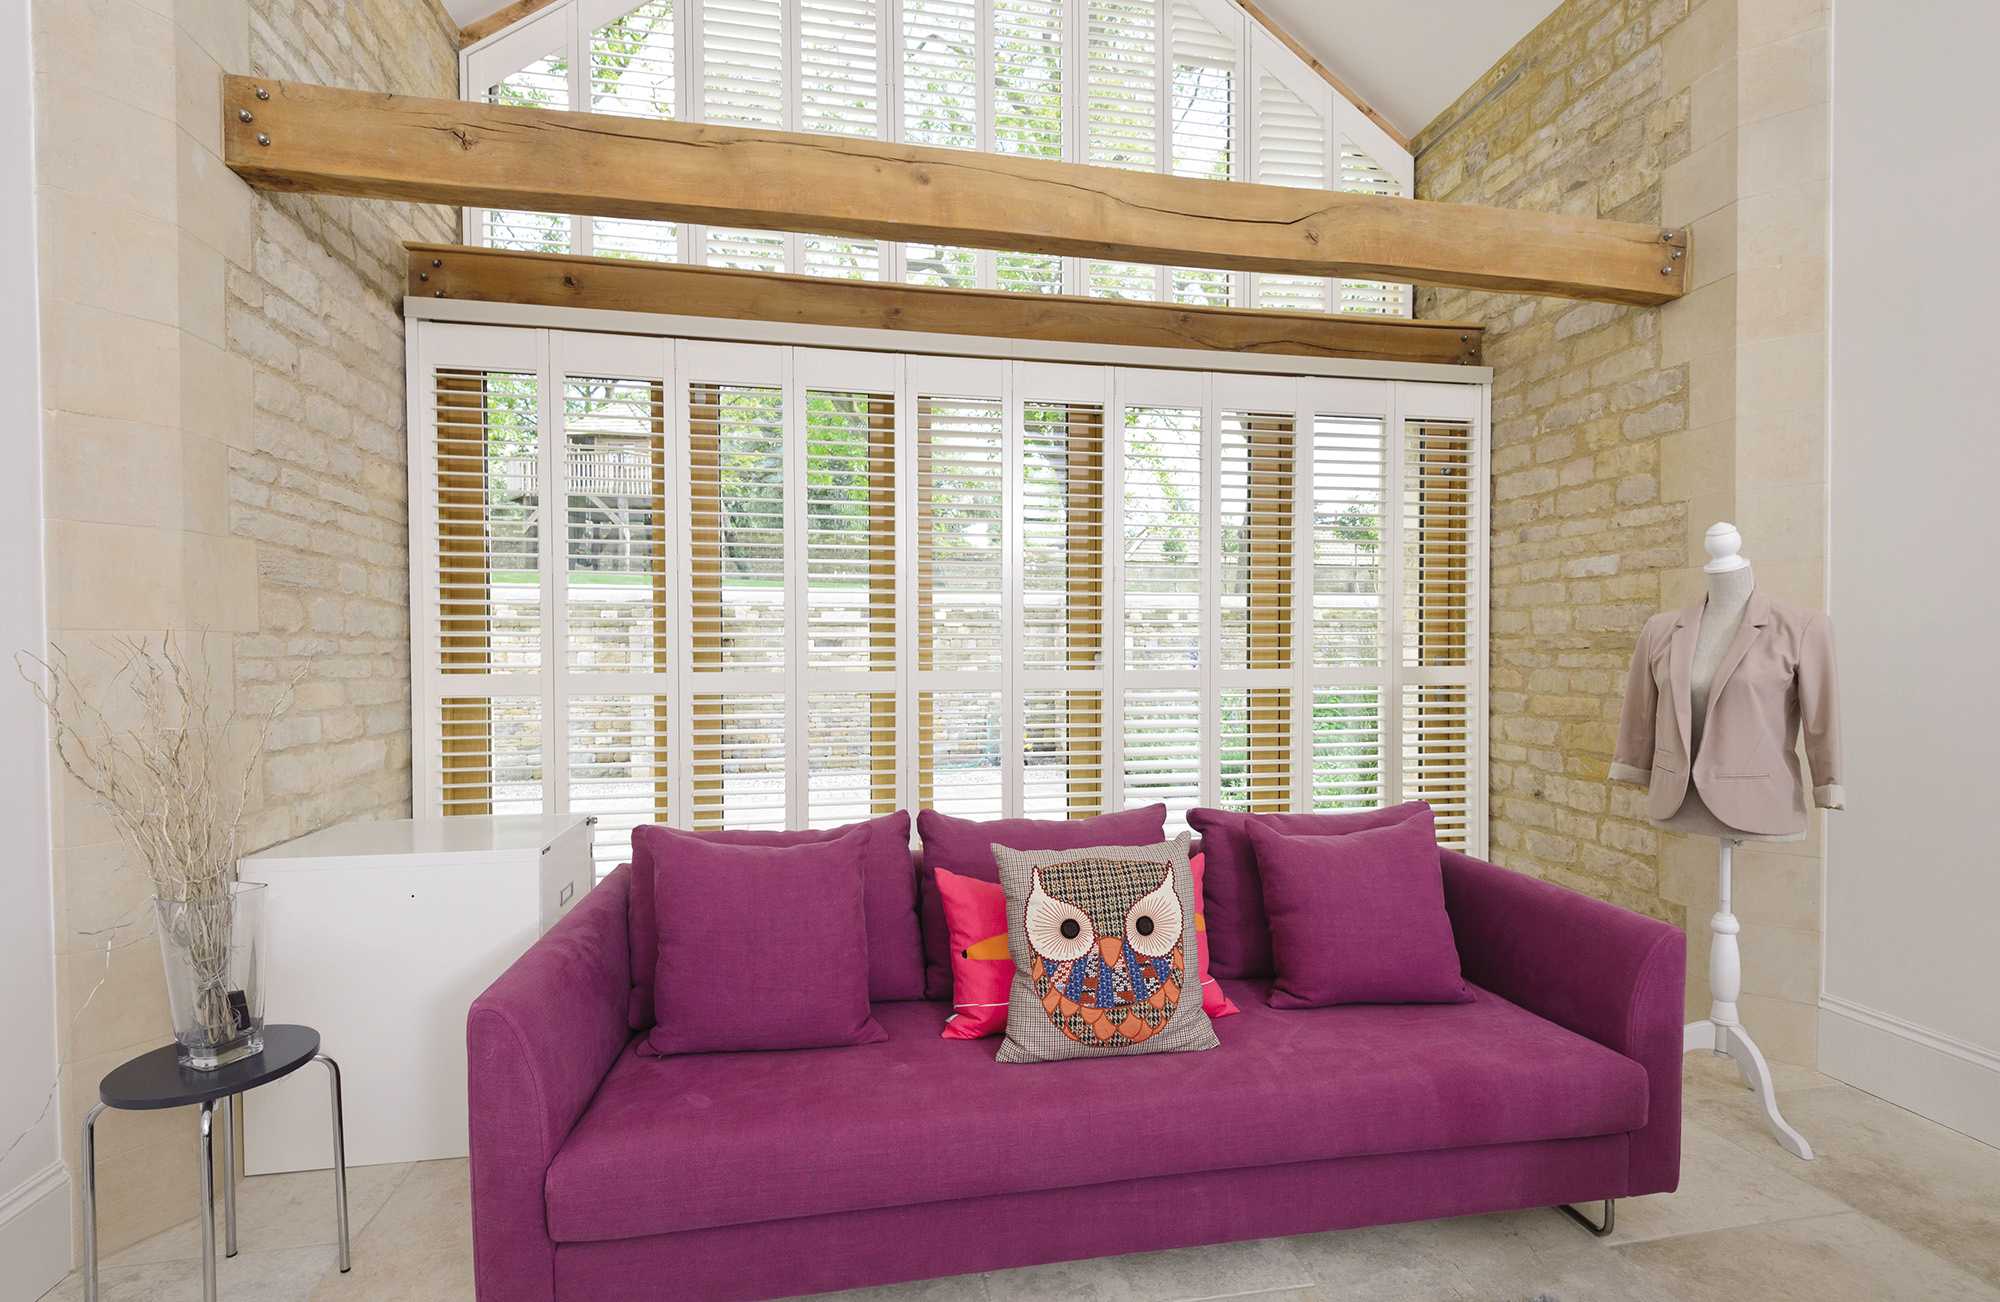 Wide tracked window shutters in white contrasting with a purple sofa in a rustic living room